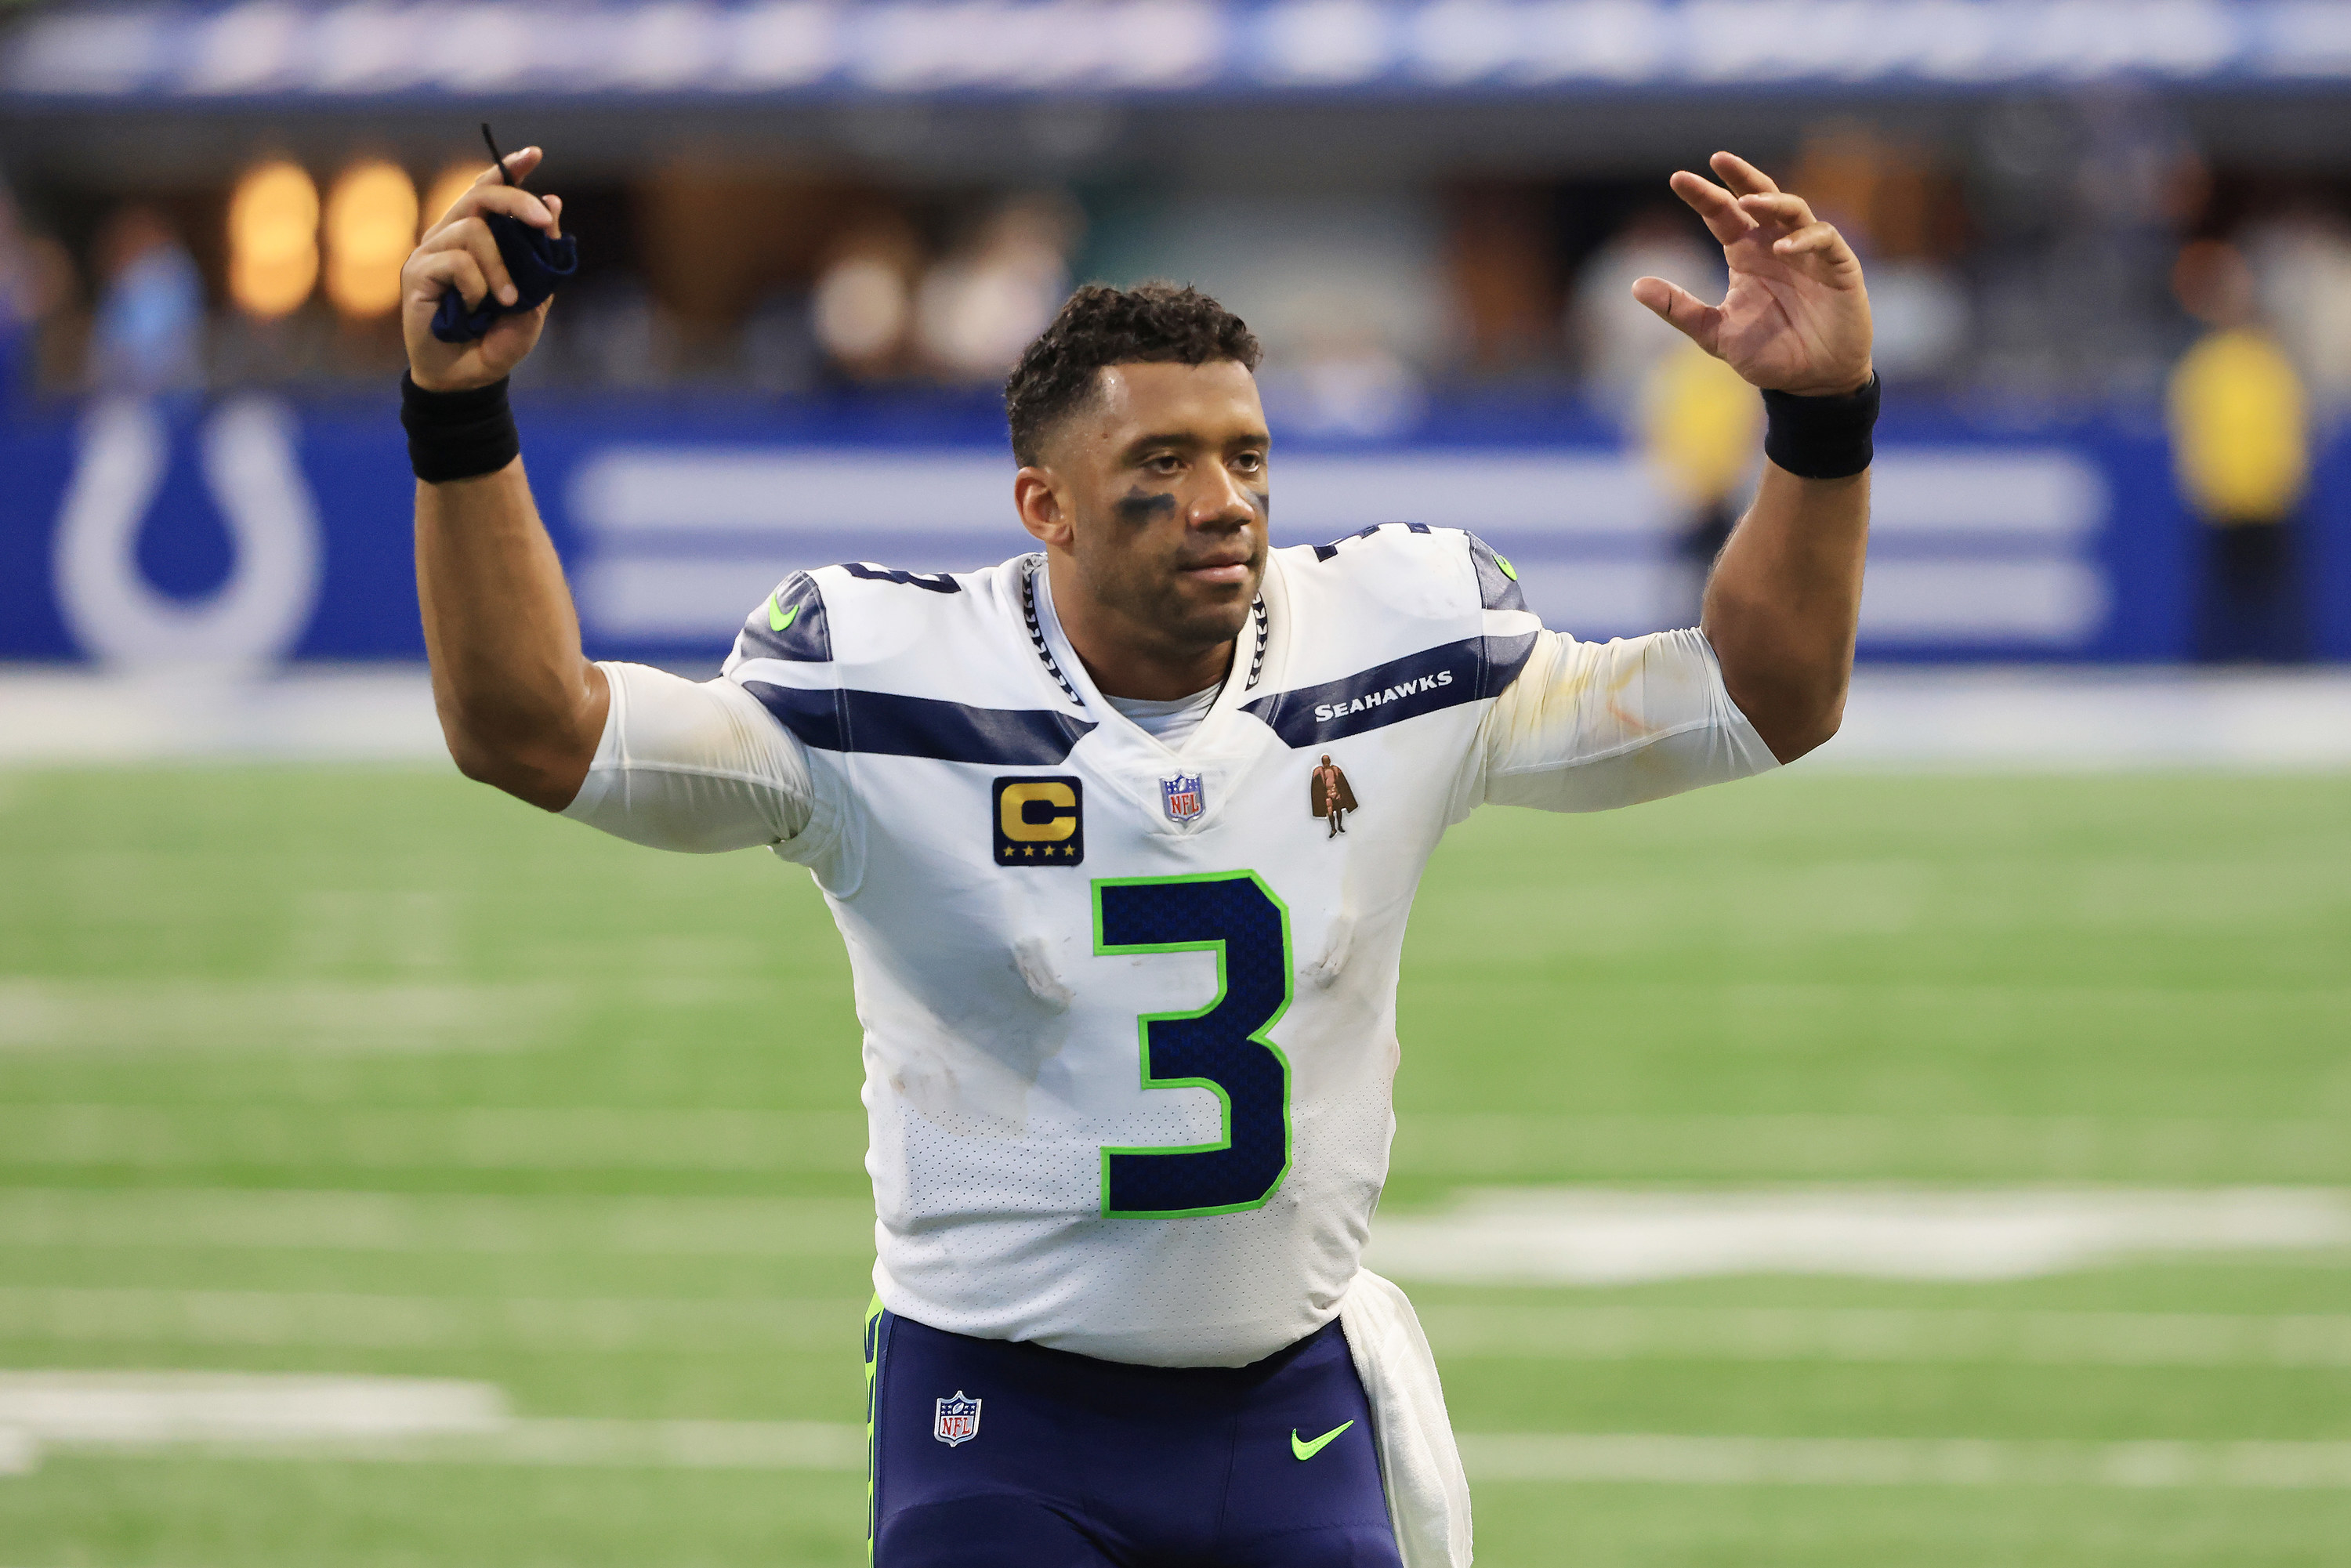 Russell Wilson pumps up the crowd